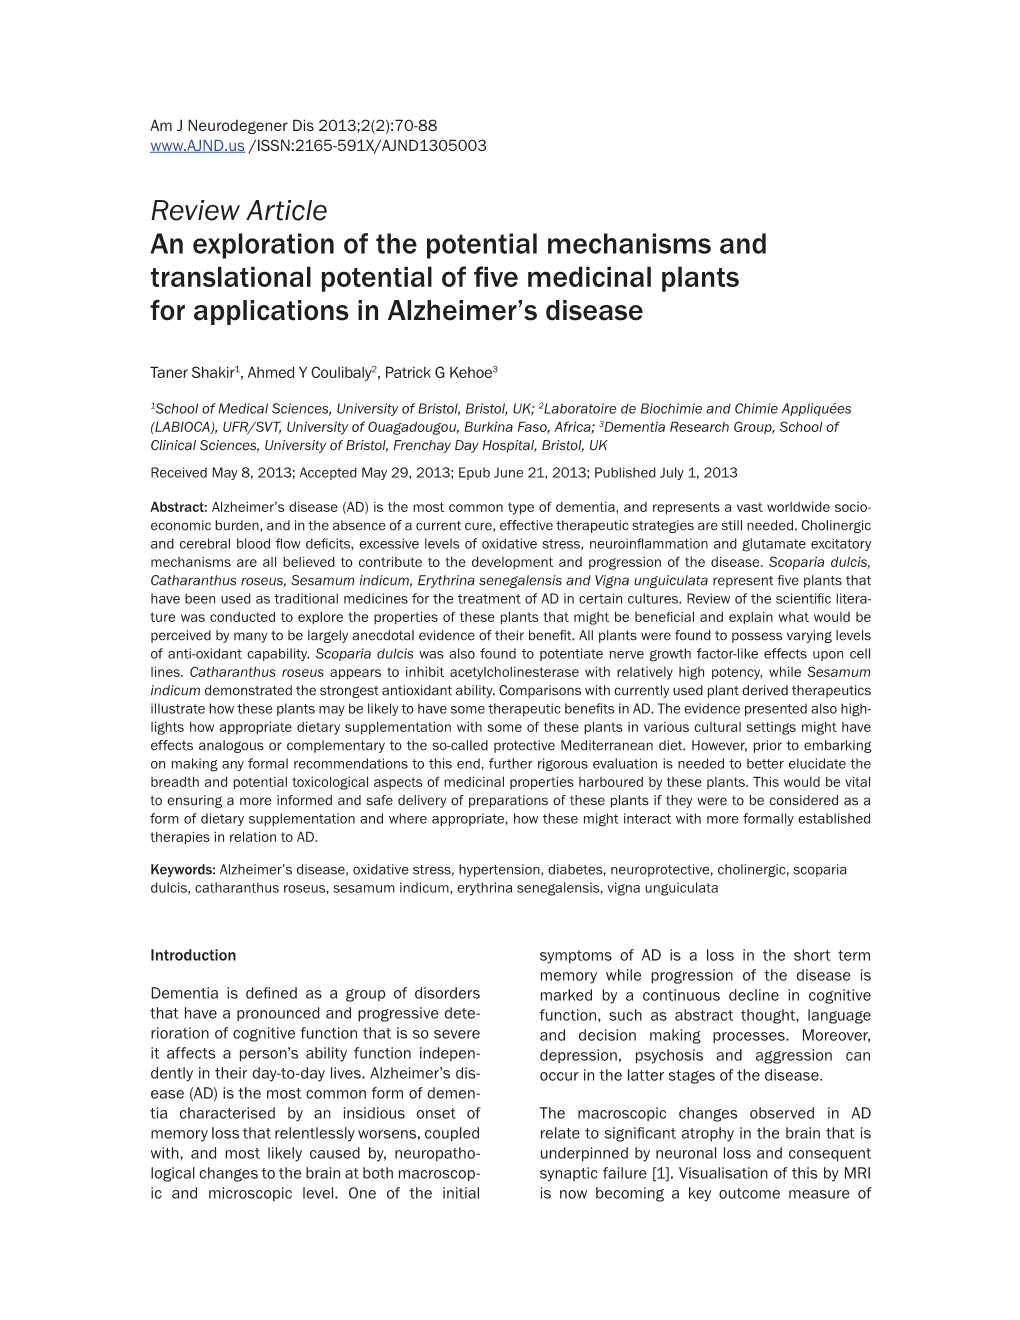 Review Article an Exploration of the Potential Mechanisms and Translational Potential of Five Medicinal Plants for Applications in Alzheimer’S Disease